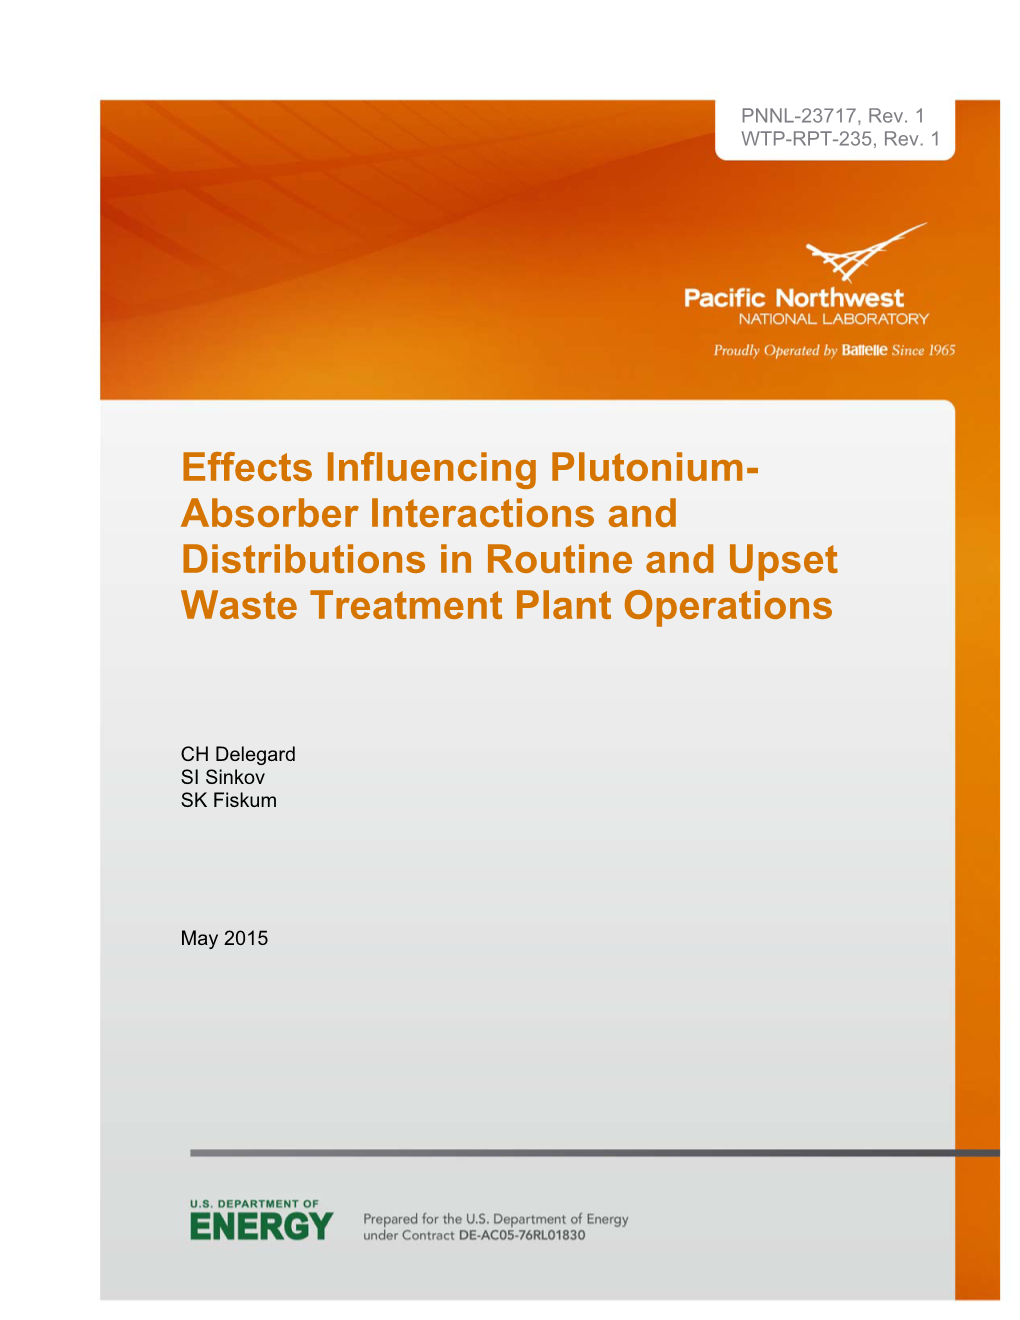 Effects Influencing Plutonium- Absorber Interactions and Distributions in Routine and Upset Waste Treatment Plant Operations